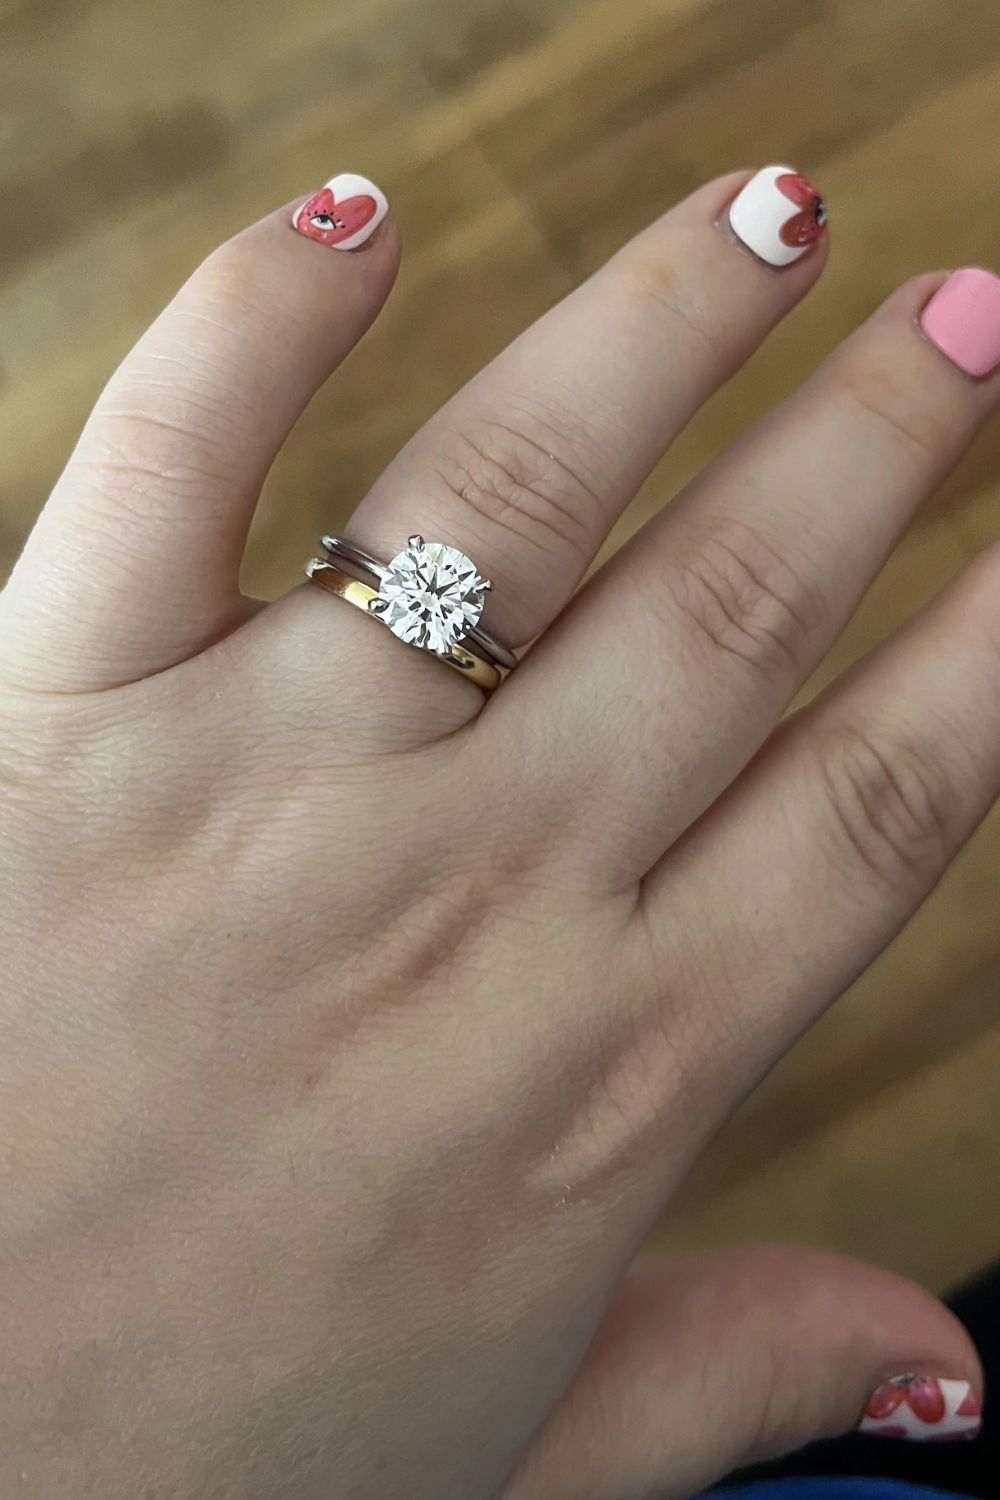 Is Engagement Ring too small